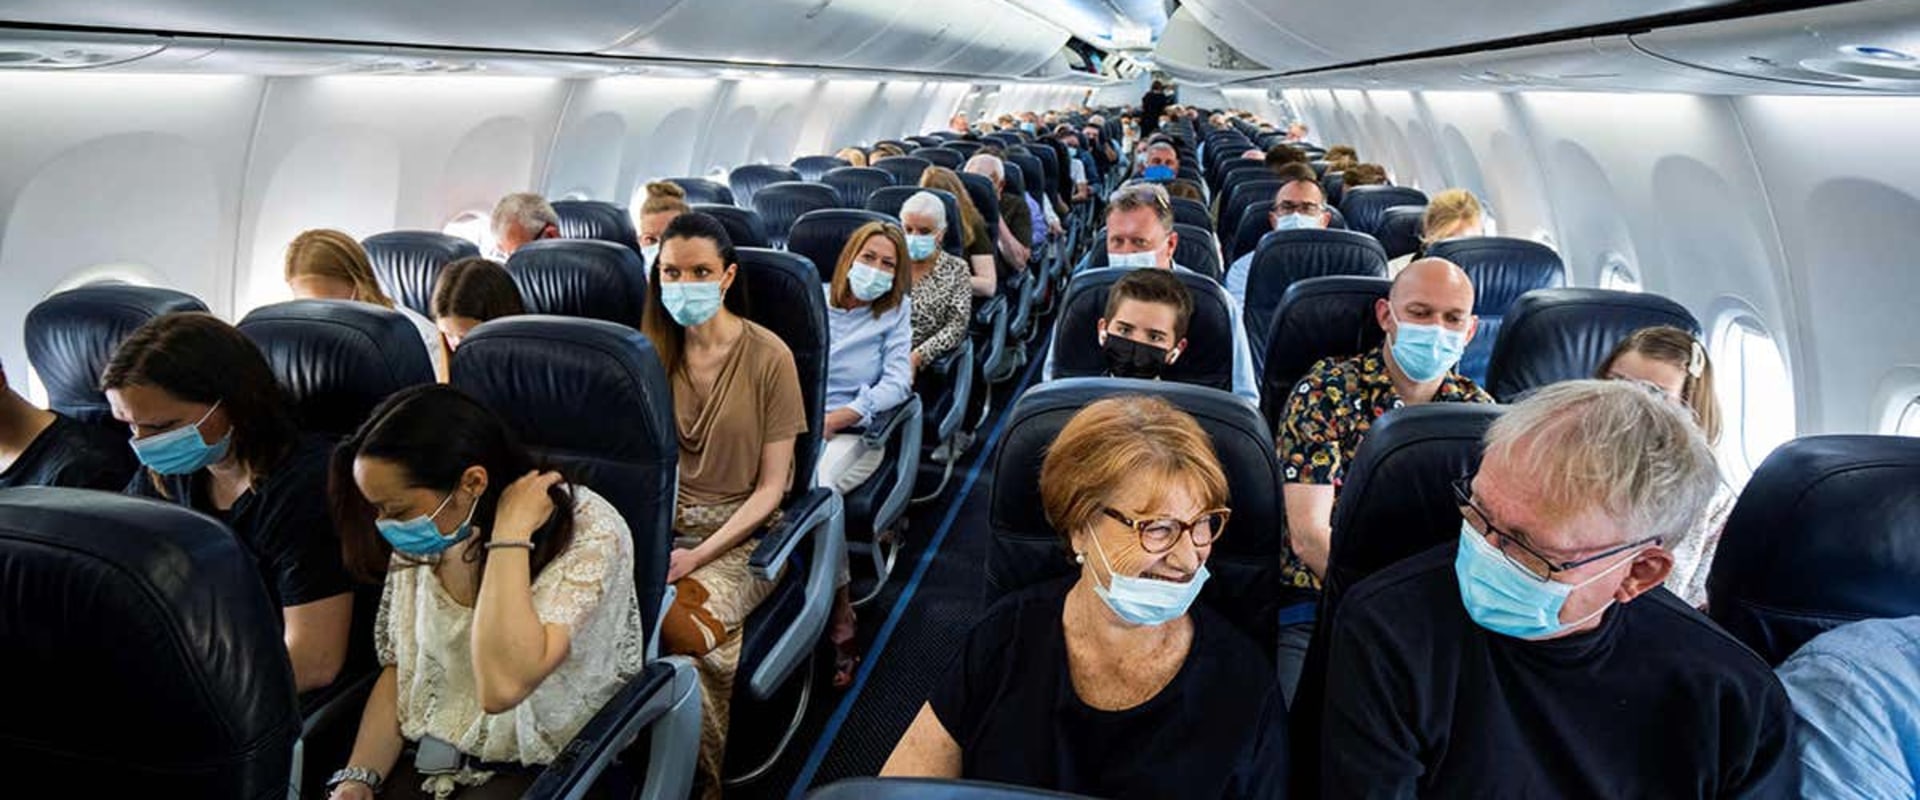 Is it Safe to Travel During the Covid-19 Pandemic?